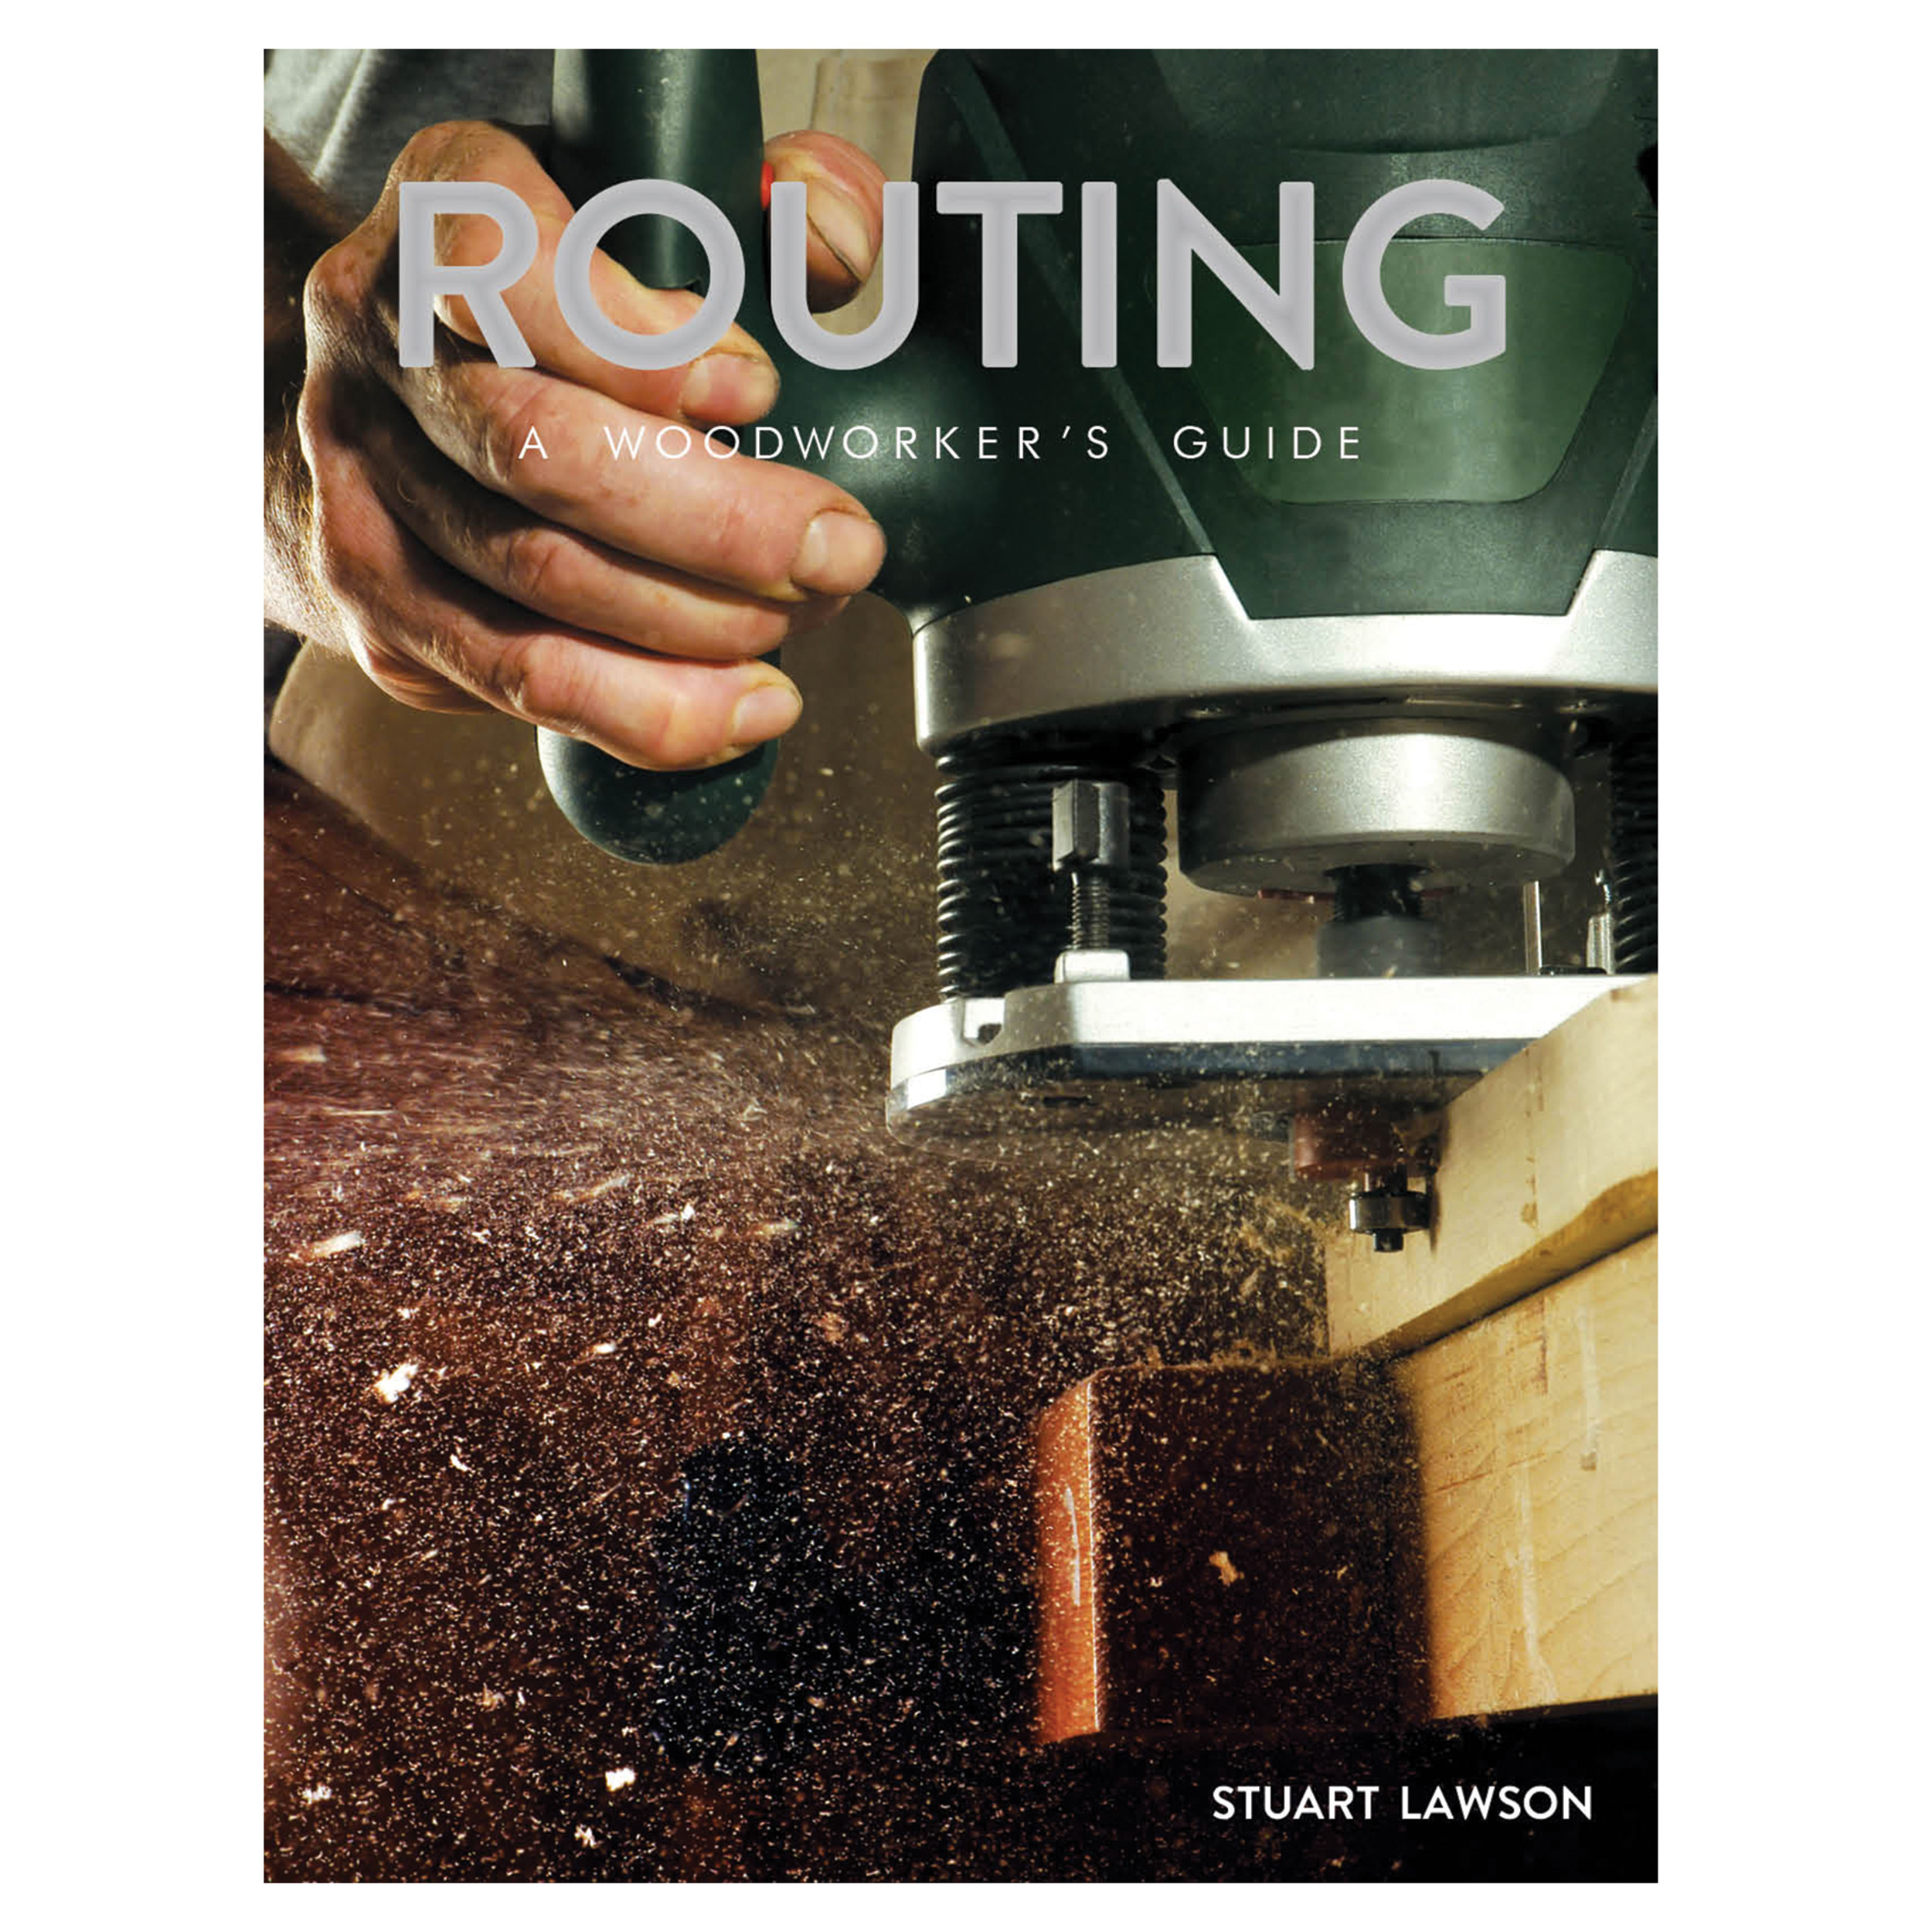 Routing, A Woodworkers Guide